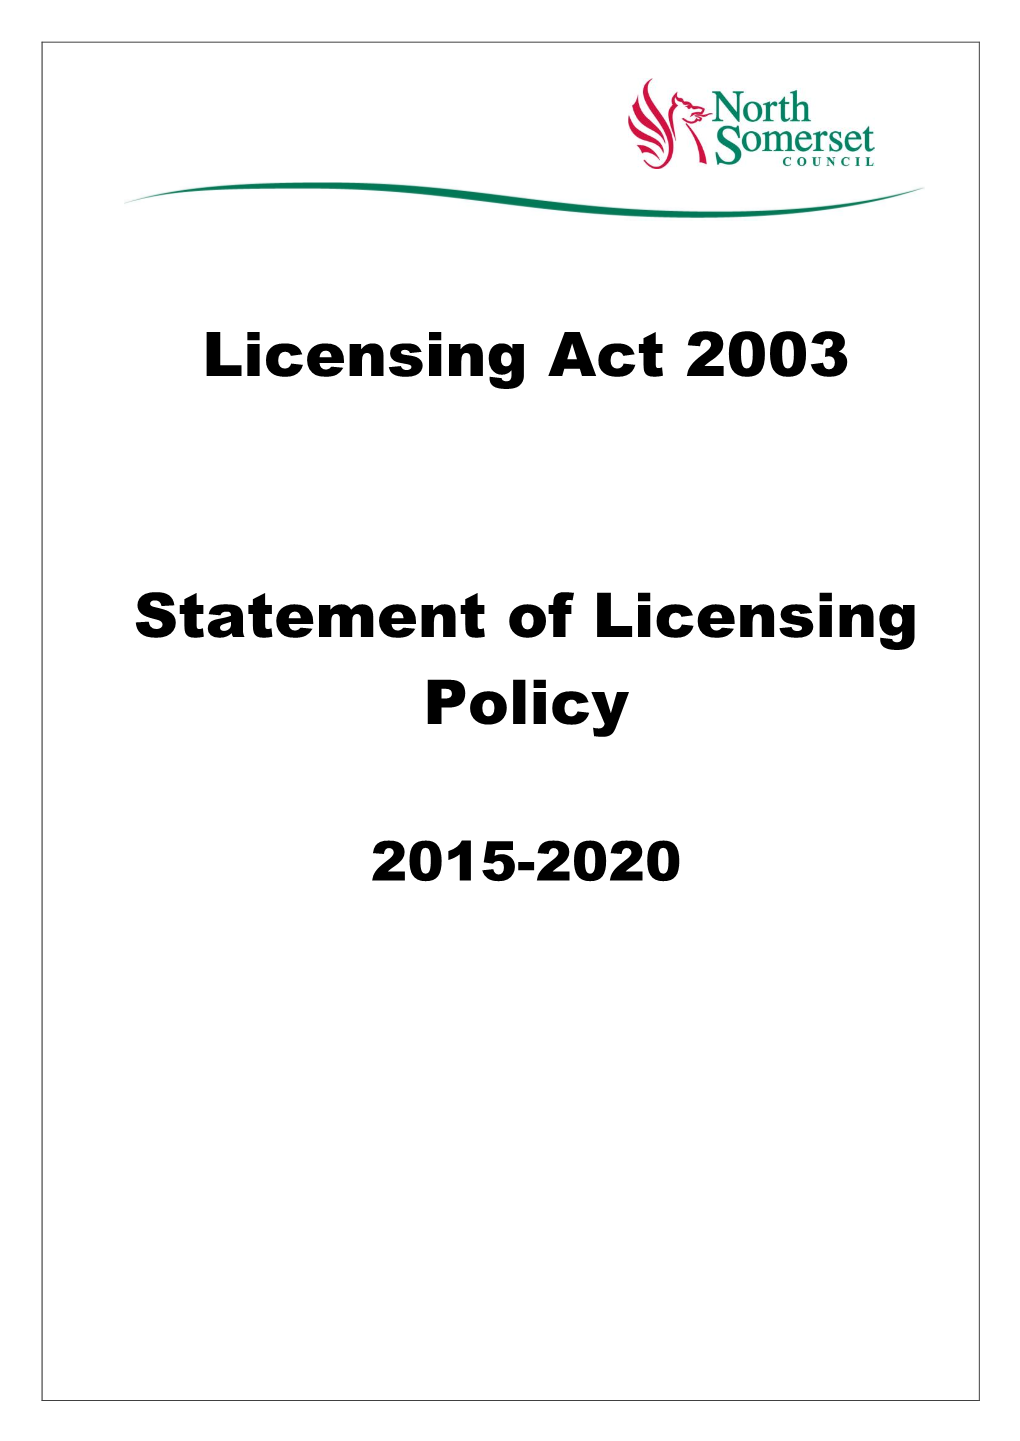 Licensing Act 2003 Statement of Licensing Policy